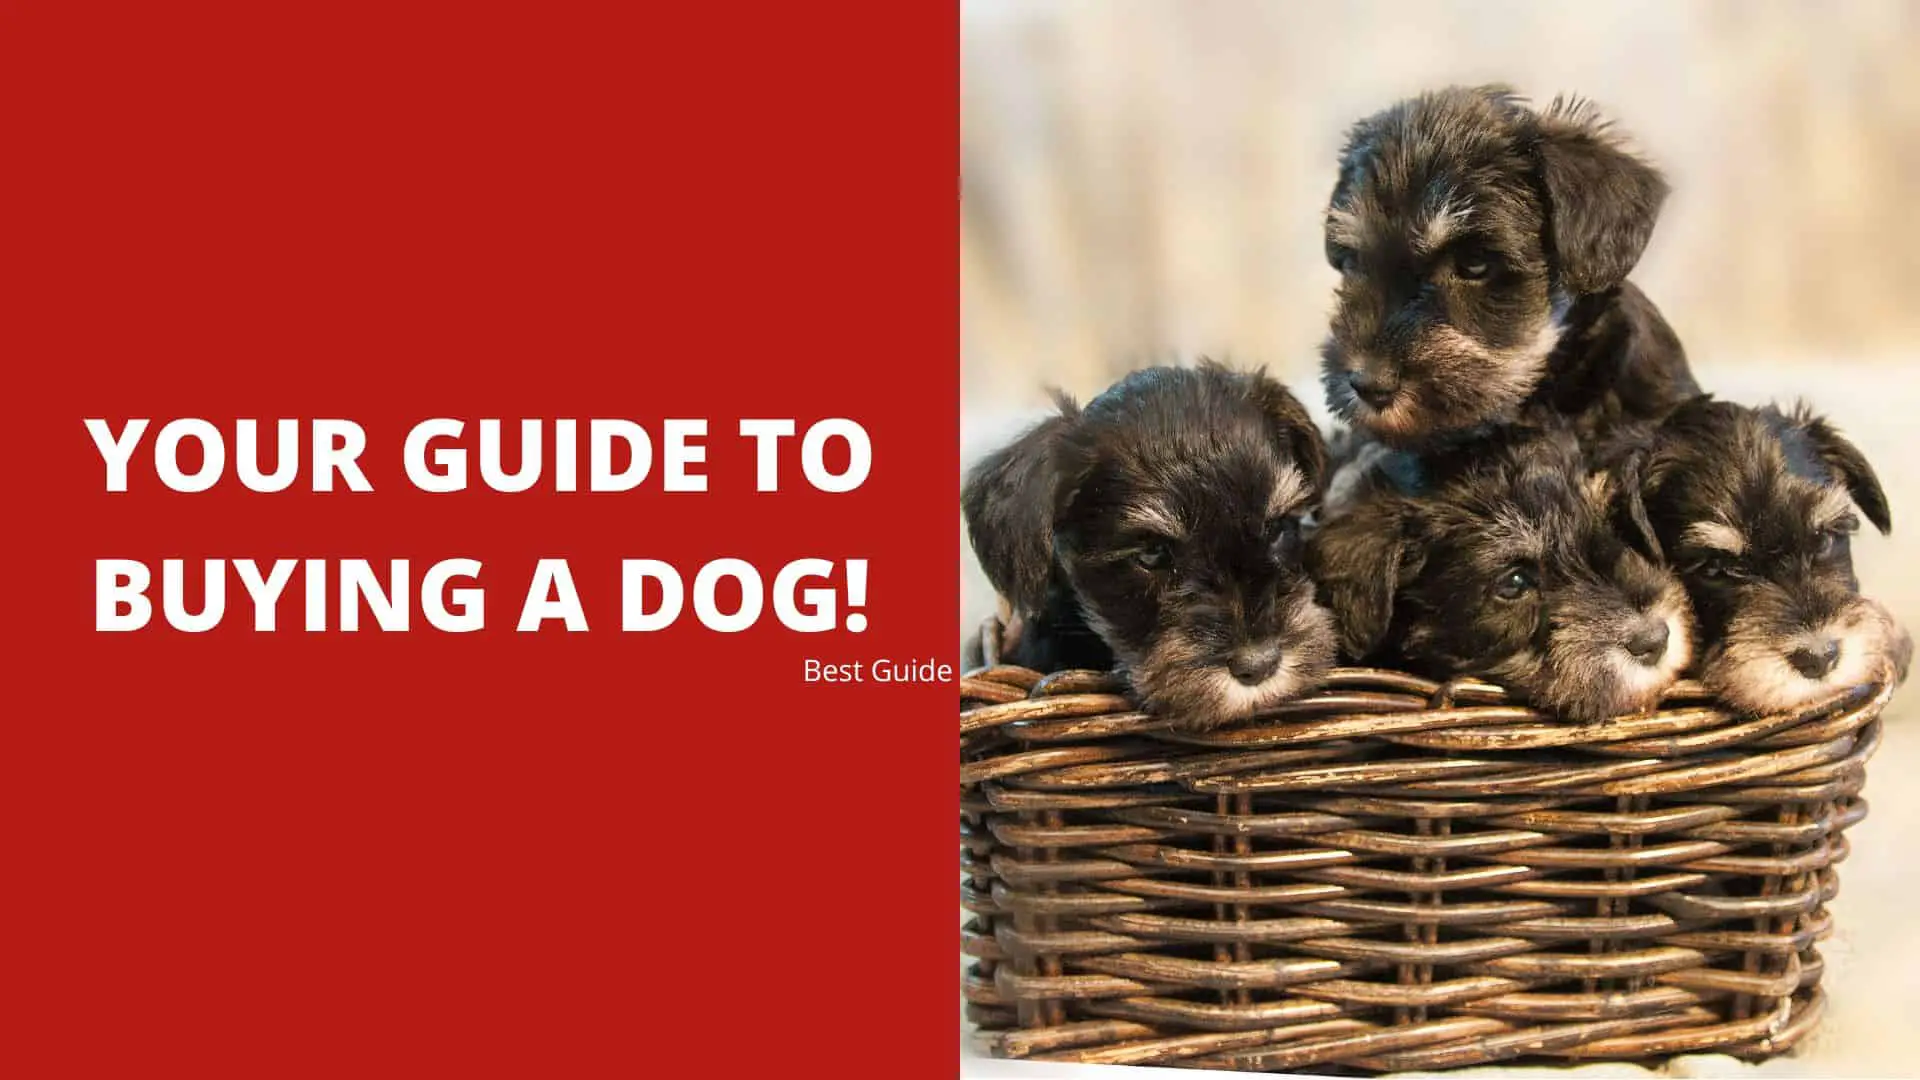 Your Best Guide to Buying a Dog! 2022